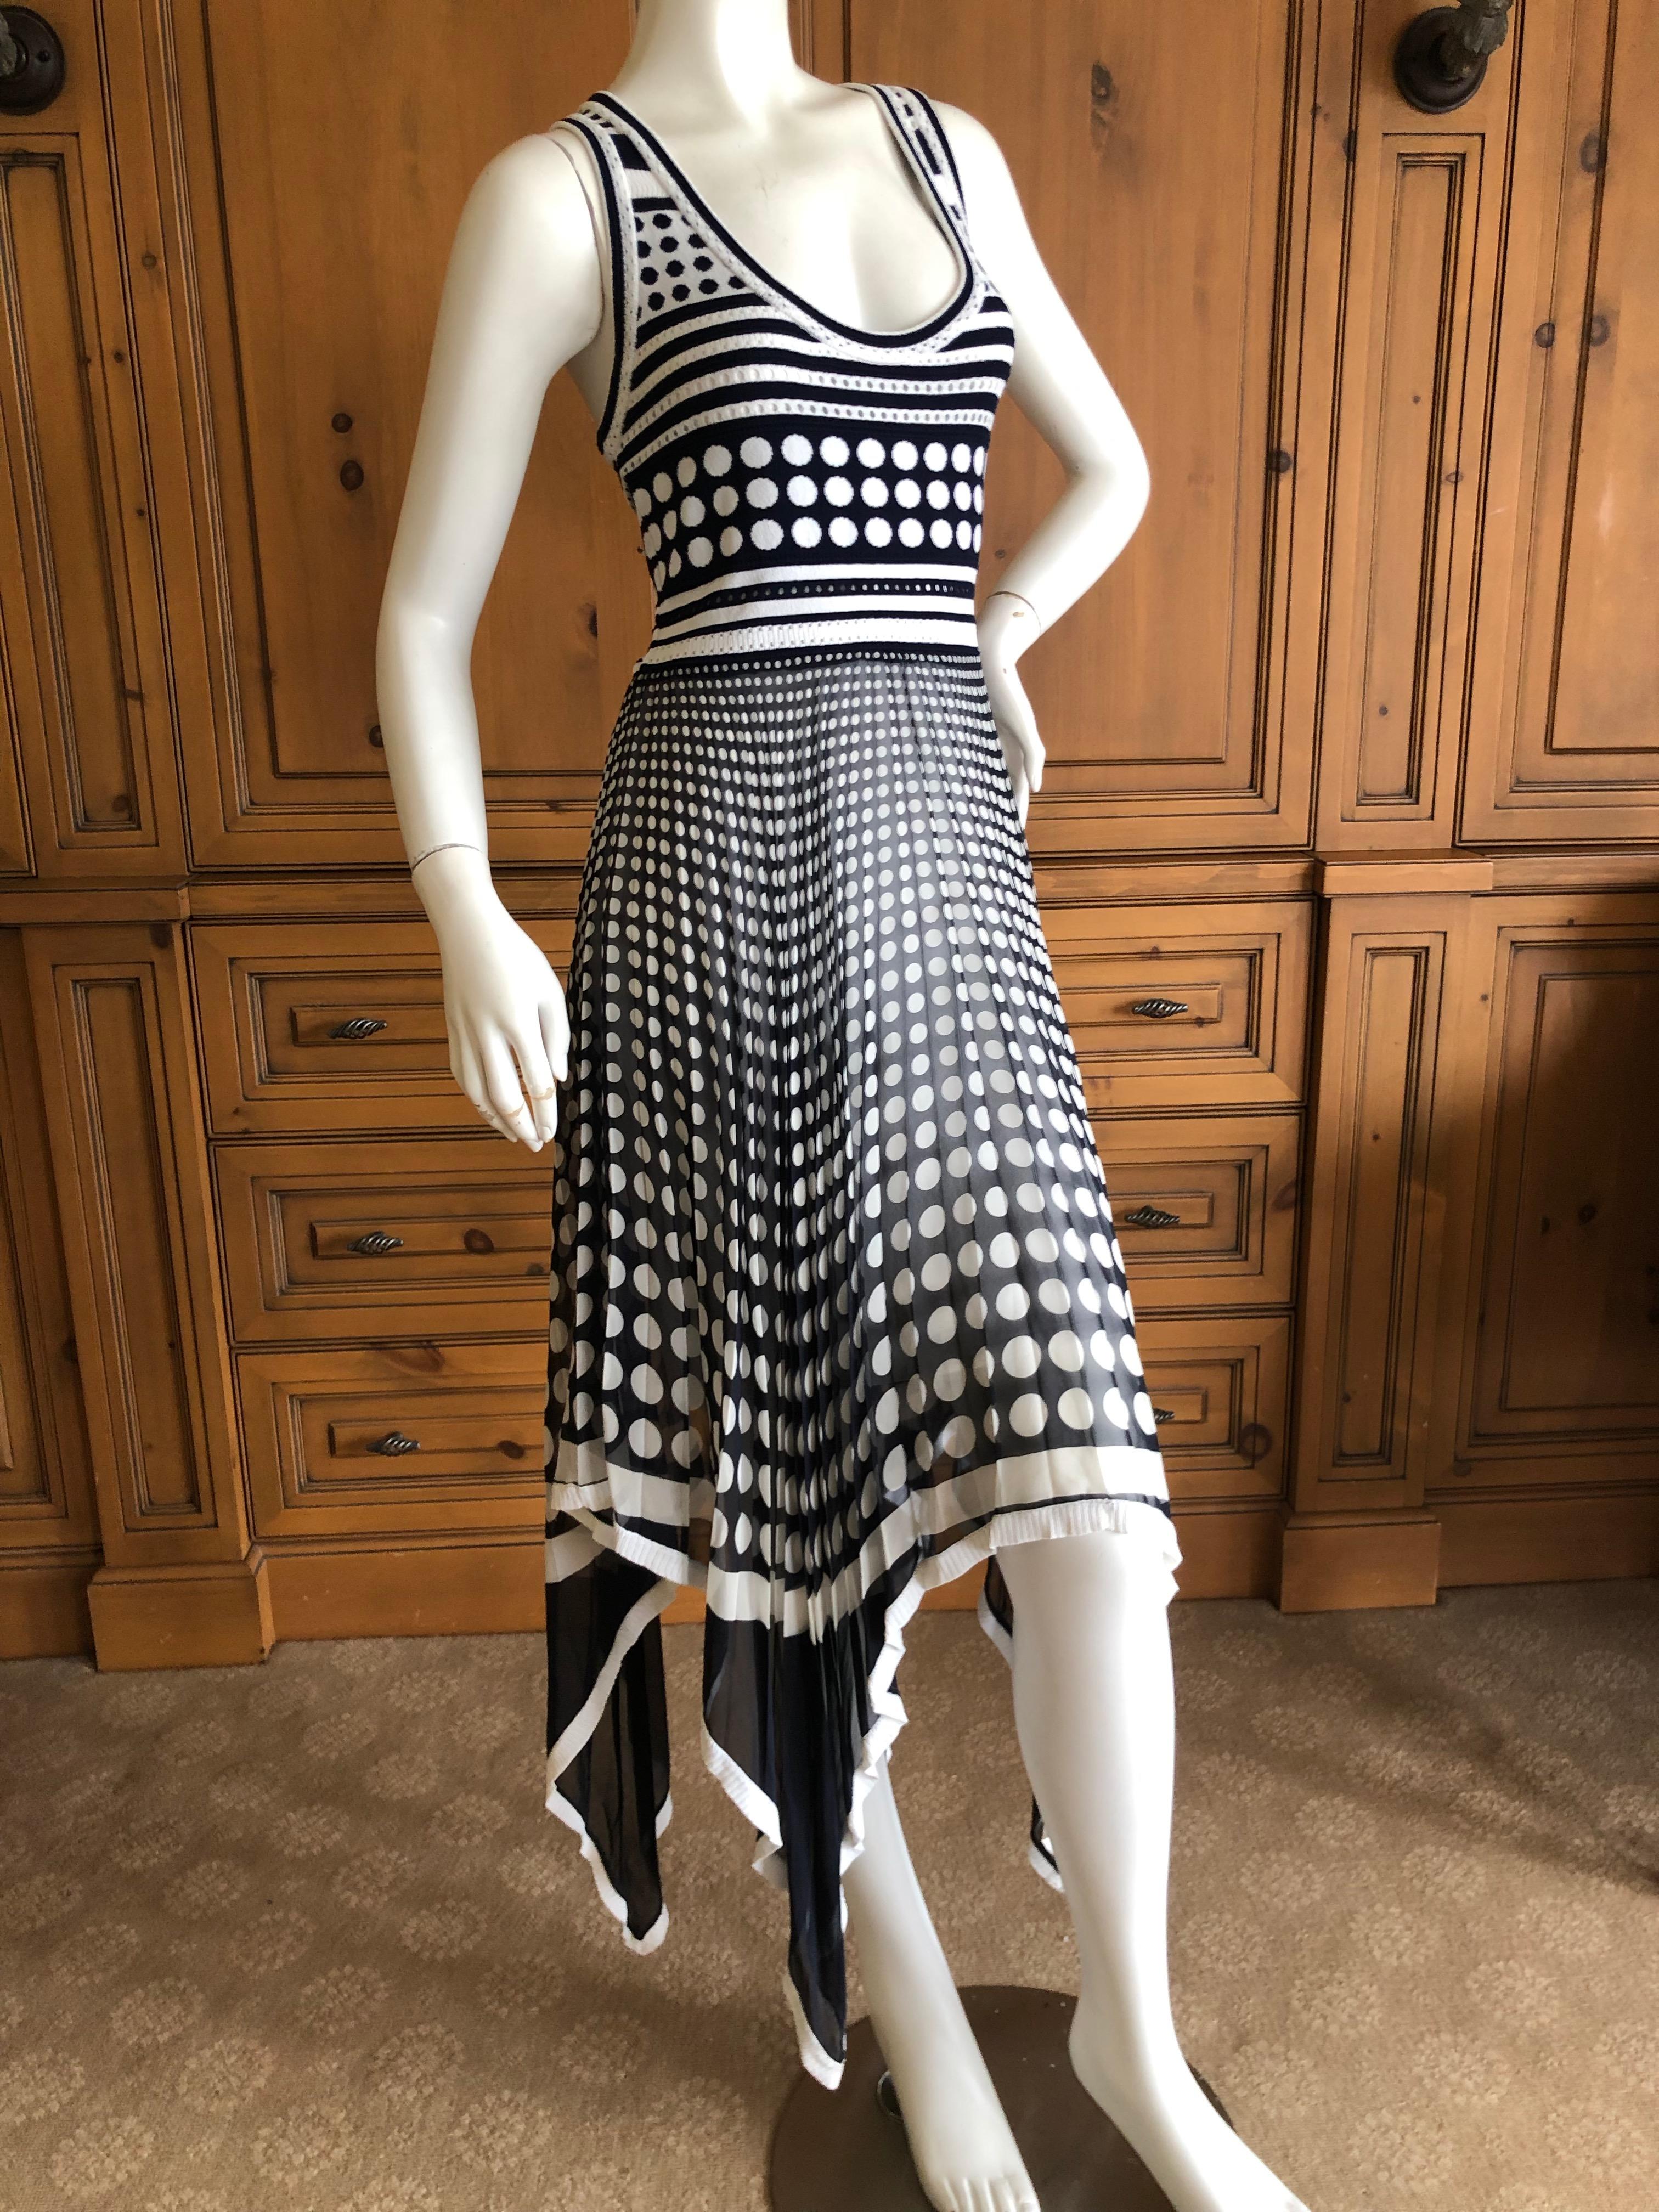 Gianfranco Ferre Vintage Op Art Polka Dot Dress with Pleated Asymmetrical Skirt.
The top is knit, and the skirt is sheer silk chiffon.
Size 44 (Vintage 44 is like today 38)
Bust 36